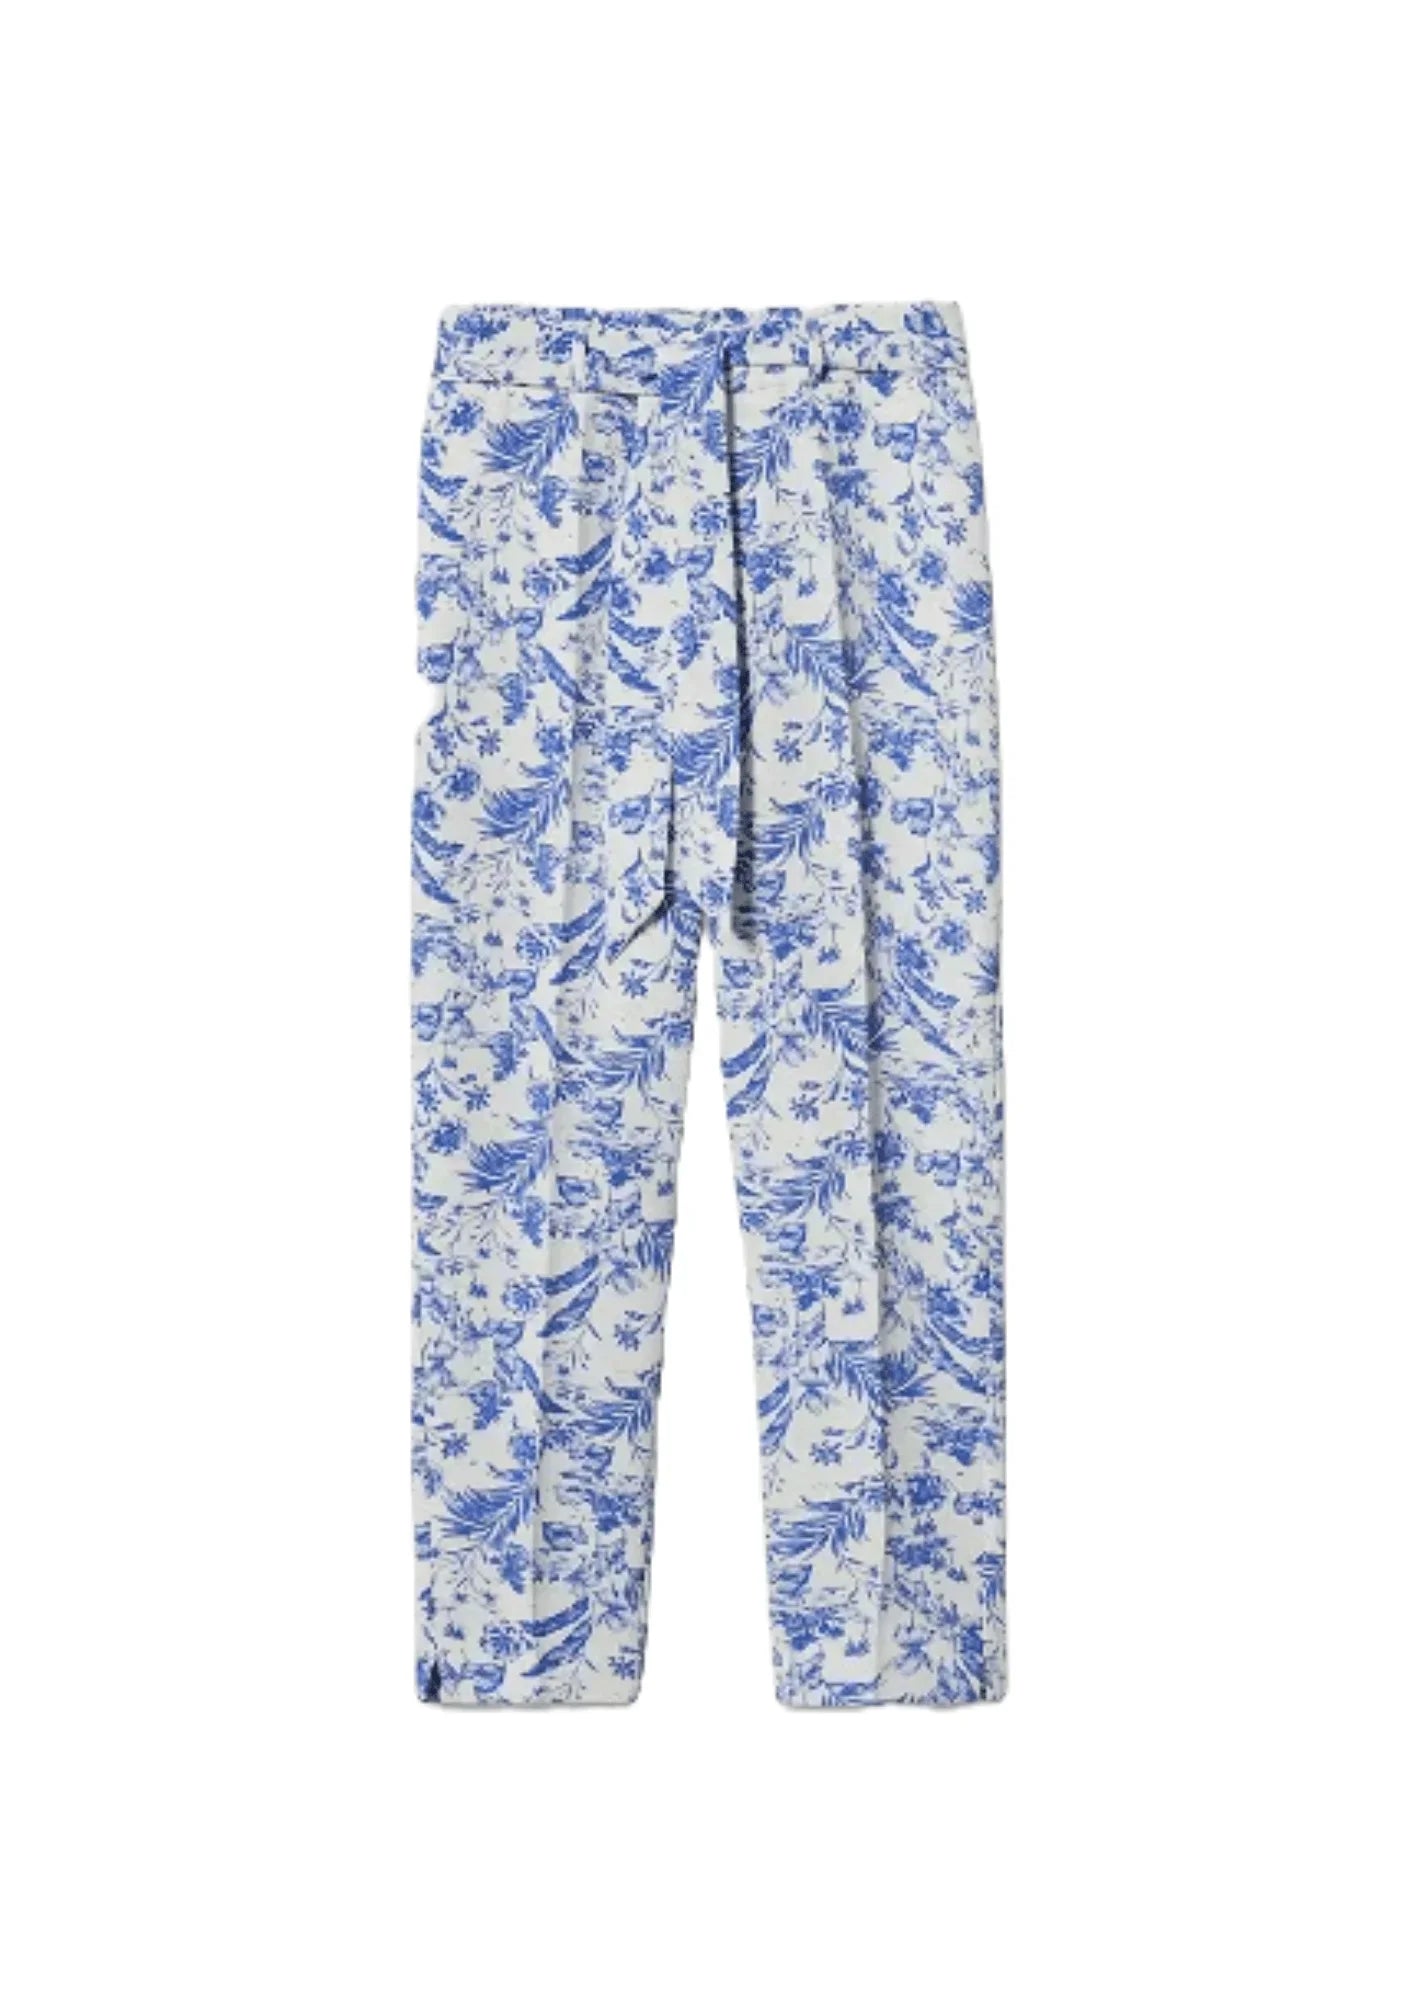 BLUE PATTERNED TROUSERS